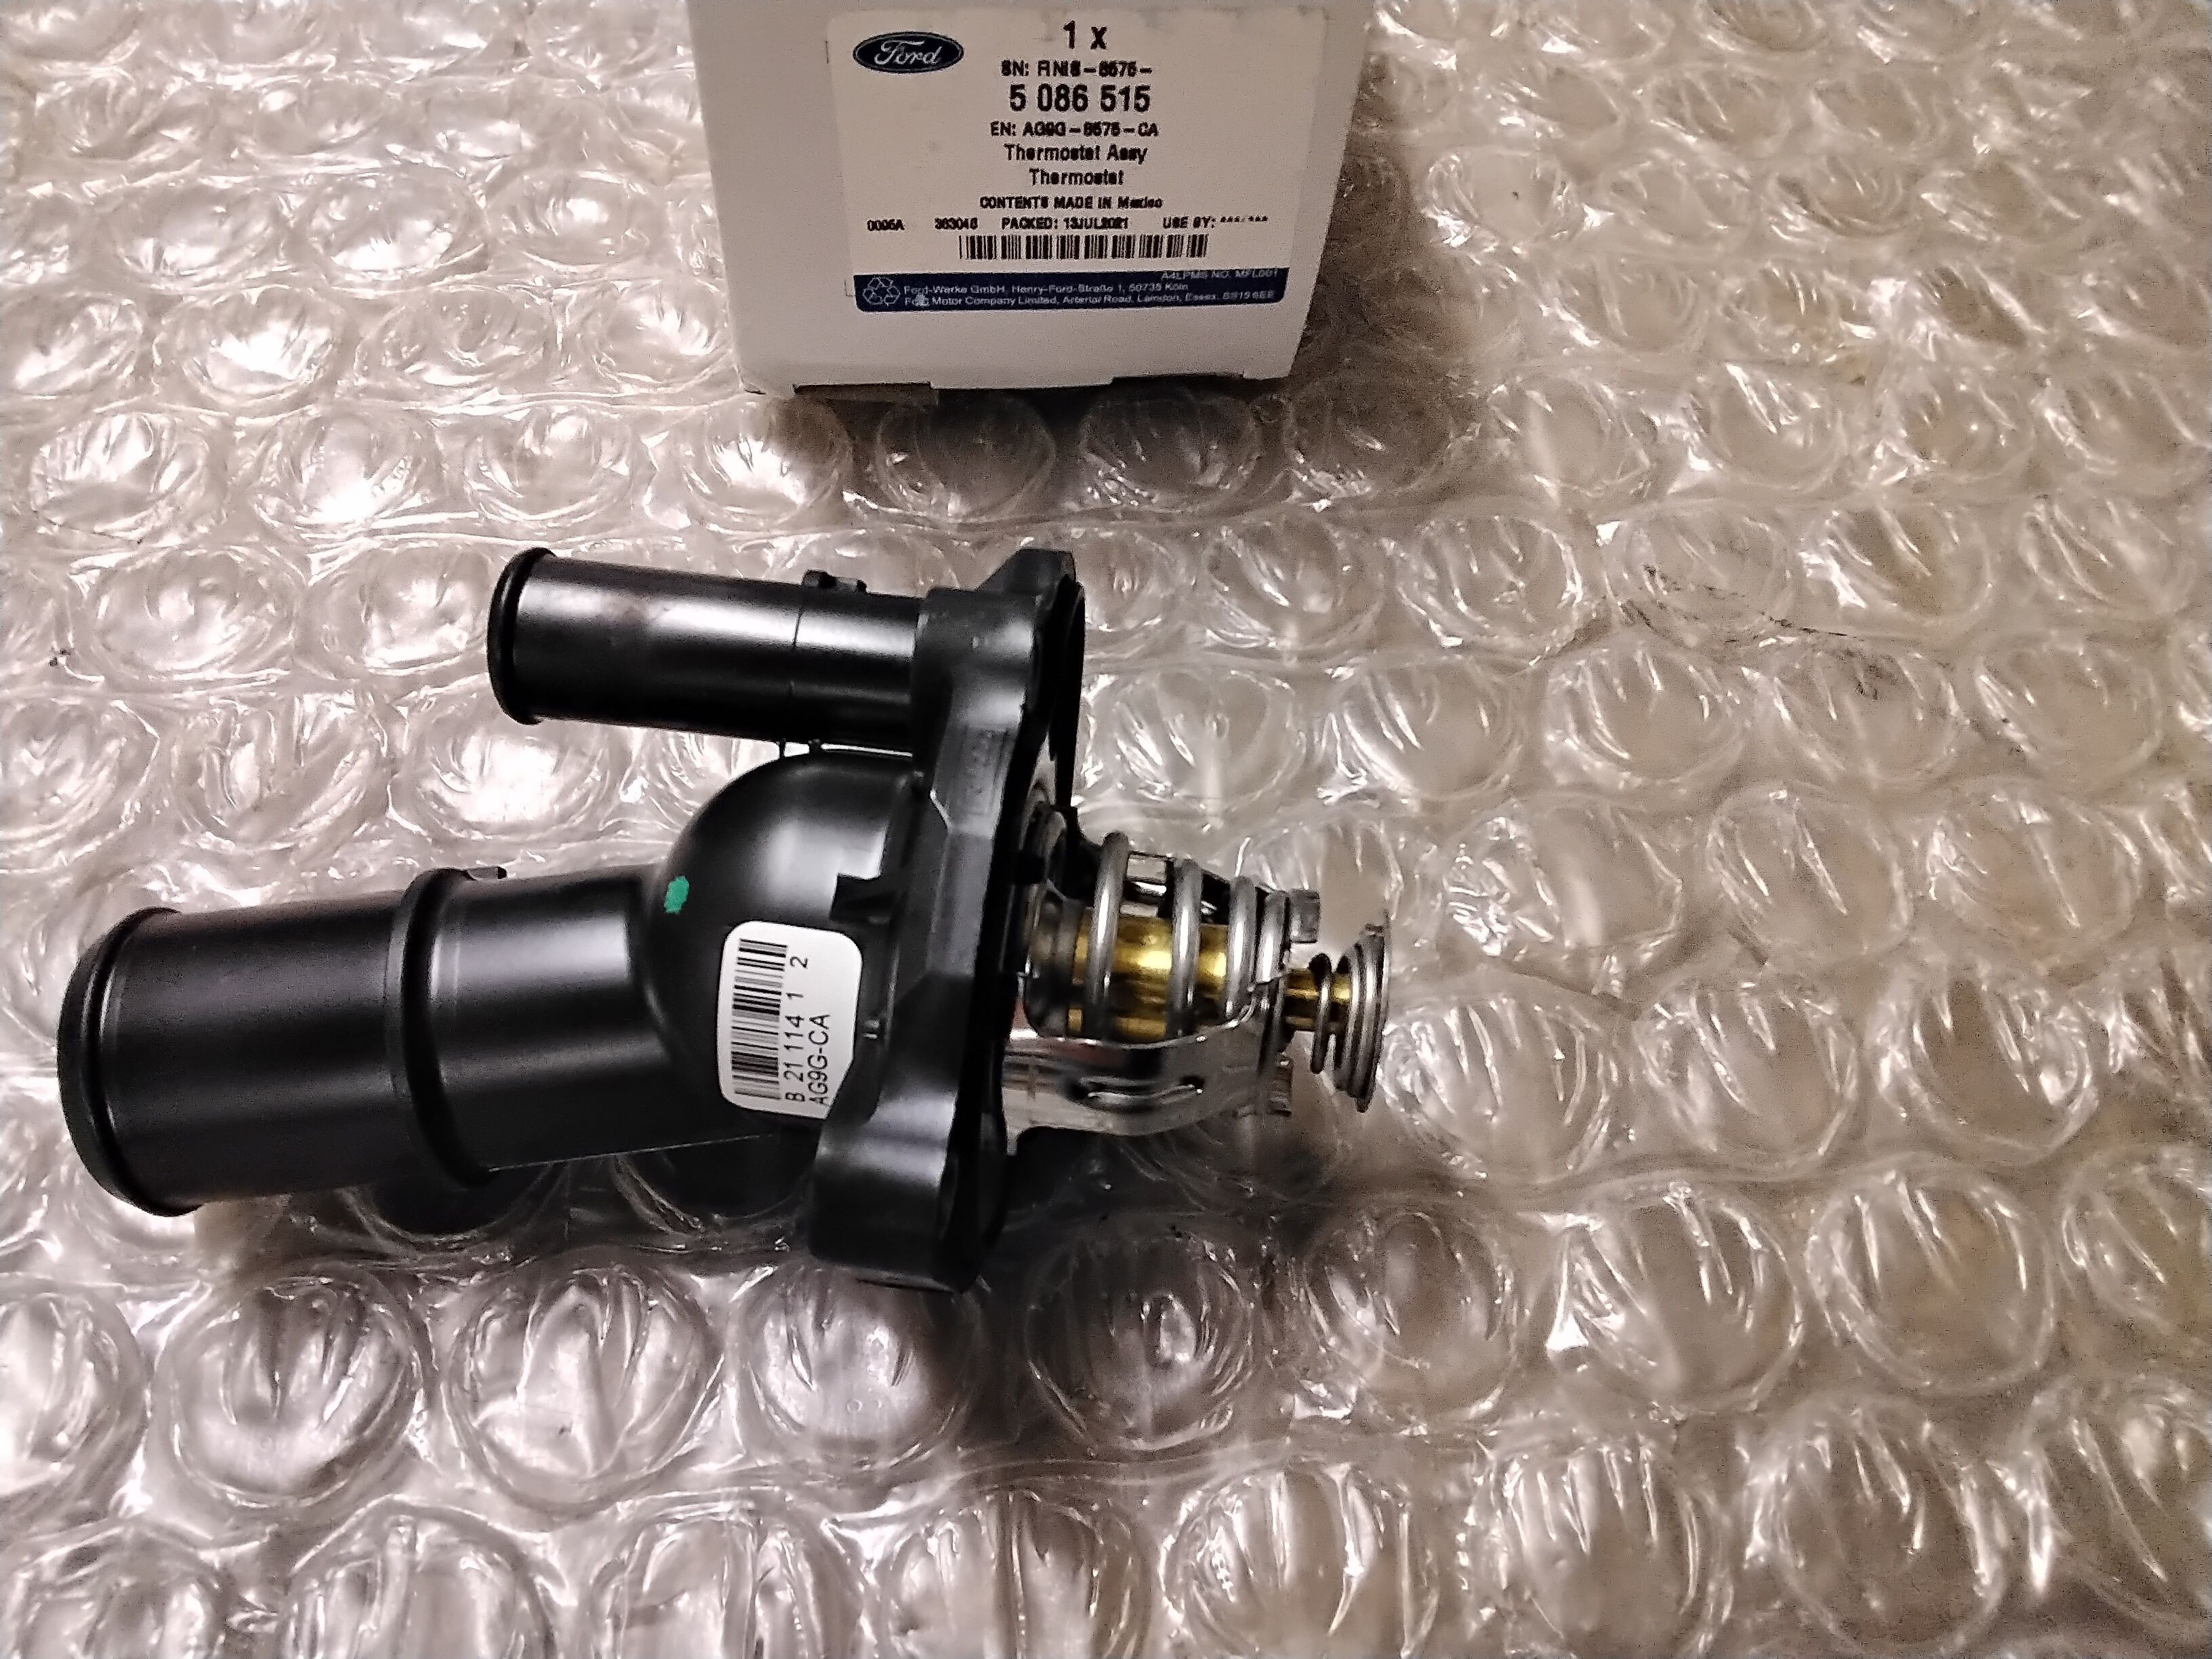 5086515-Ford Original Thermostat Ford Galaxy 2.0 EcoBoost - 2010-2015 - AG9G-8575-CA